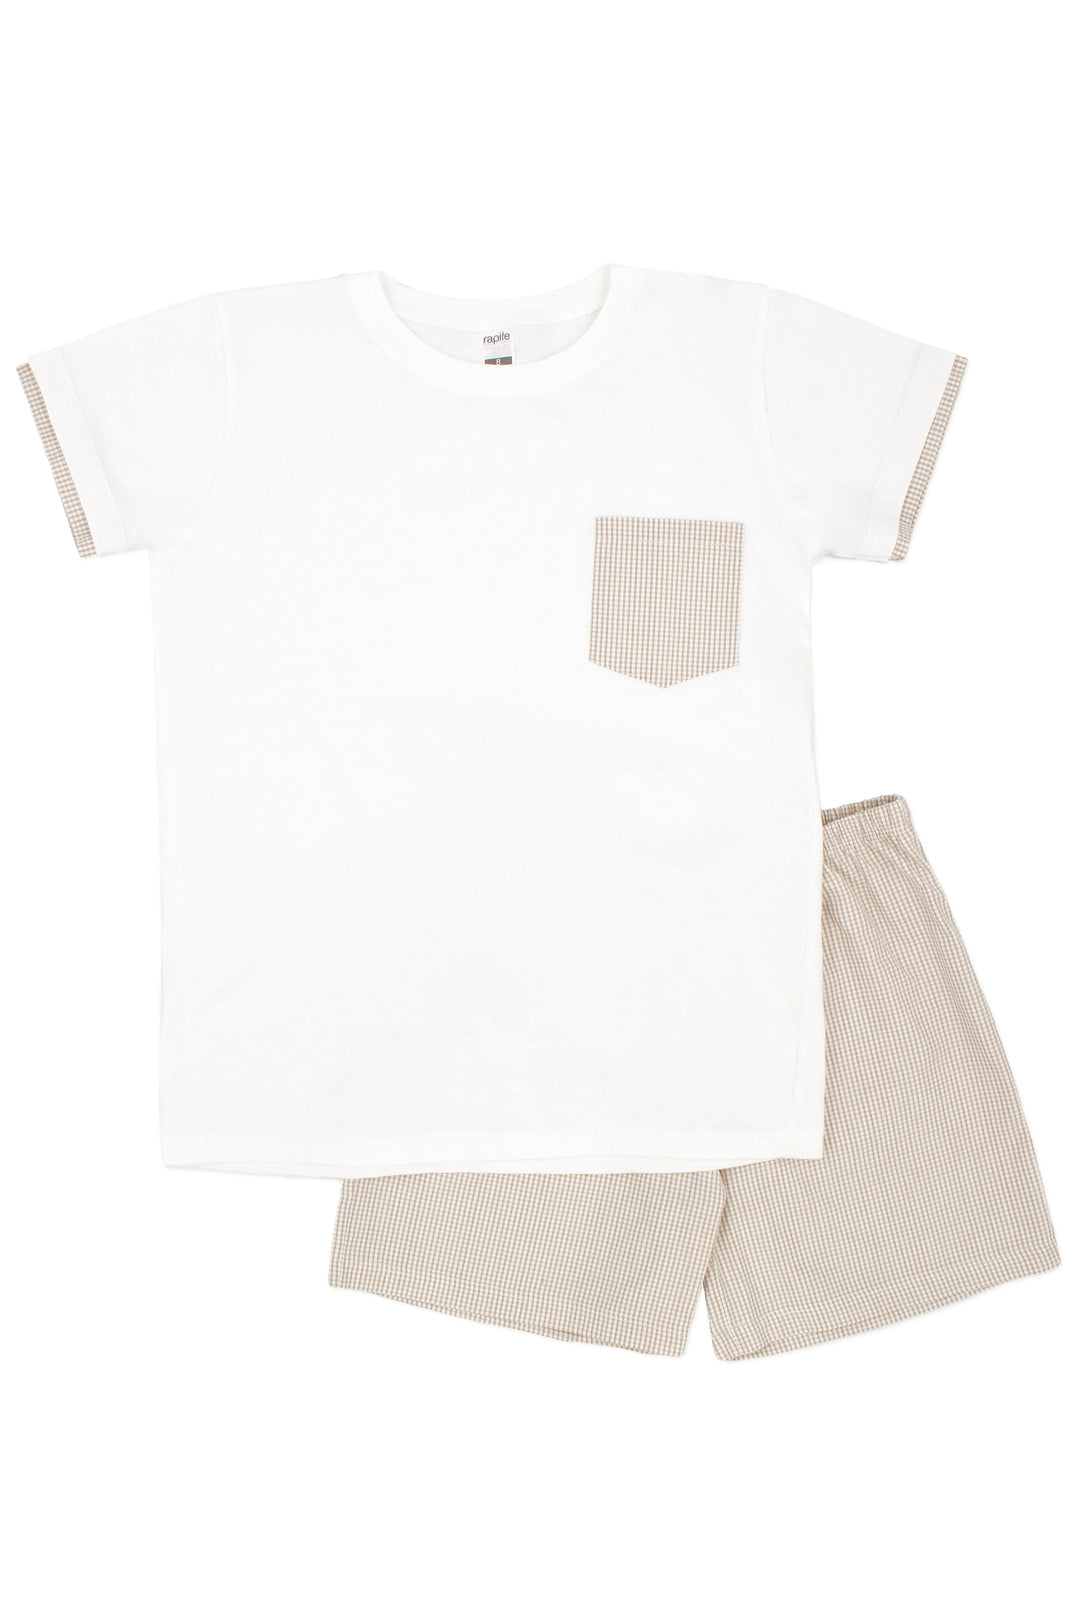 Rapife "Xavier" Beige Checked T-Shirt & Shorts | Millie and John